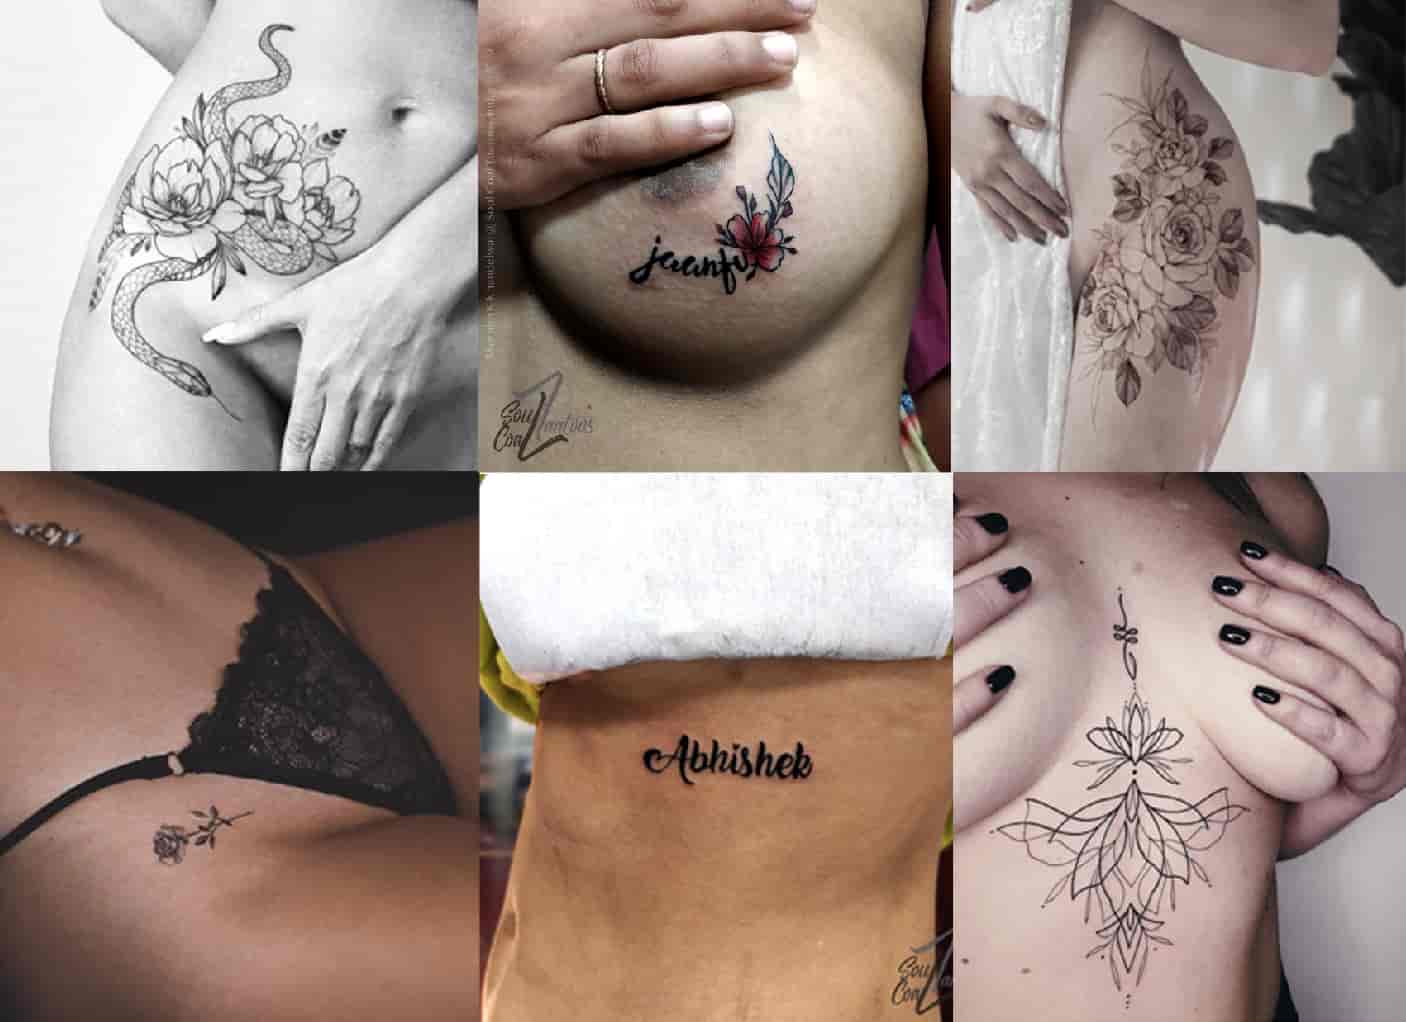 amanda finlayson recommends pictures of tattoos on private parts pic